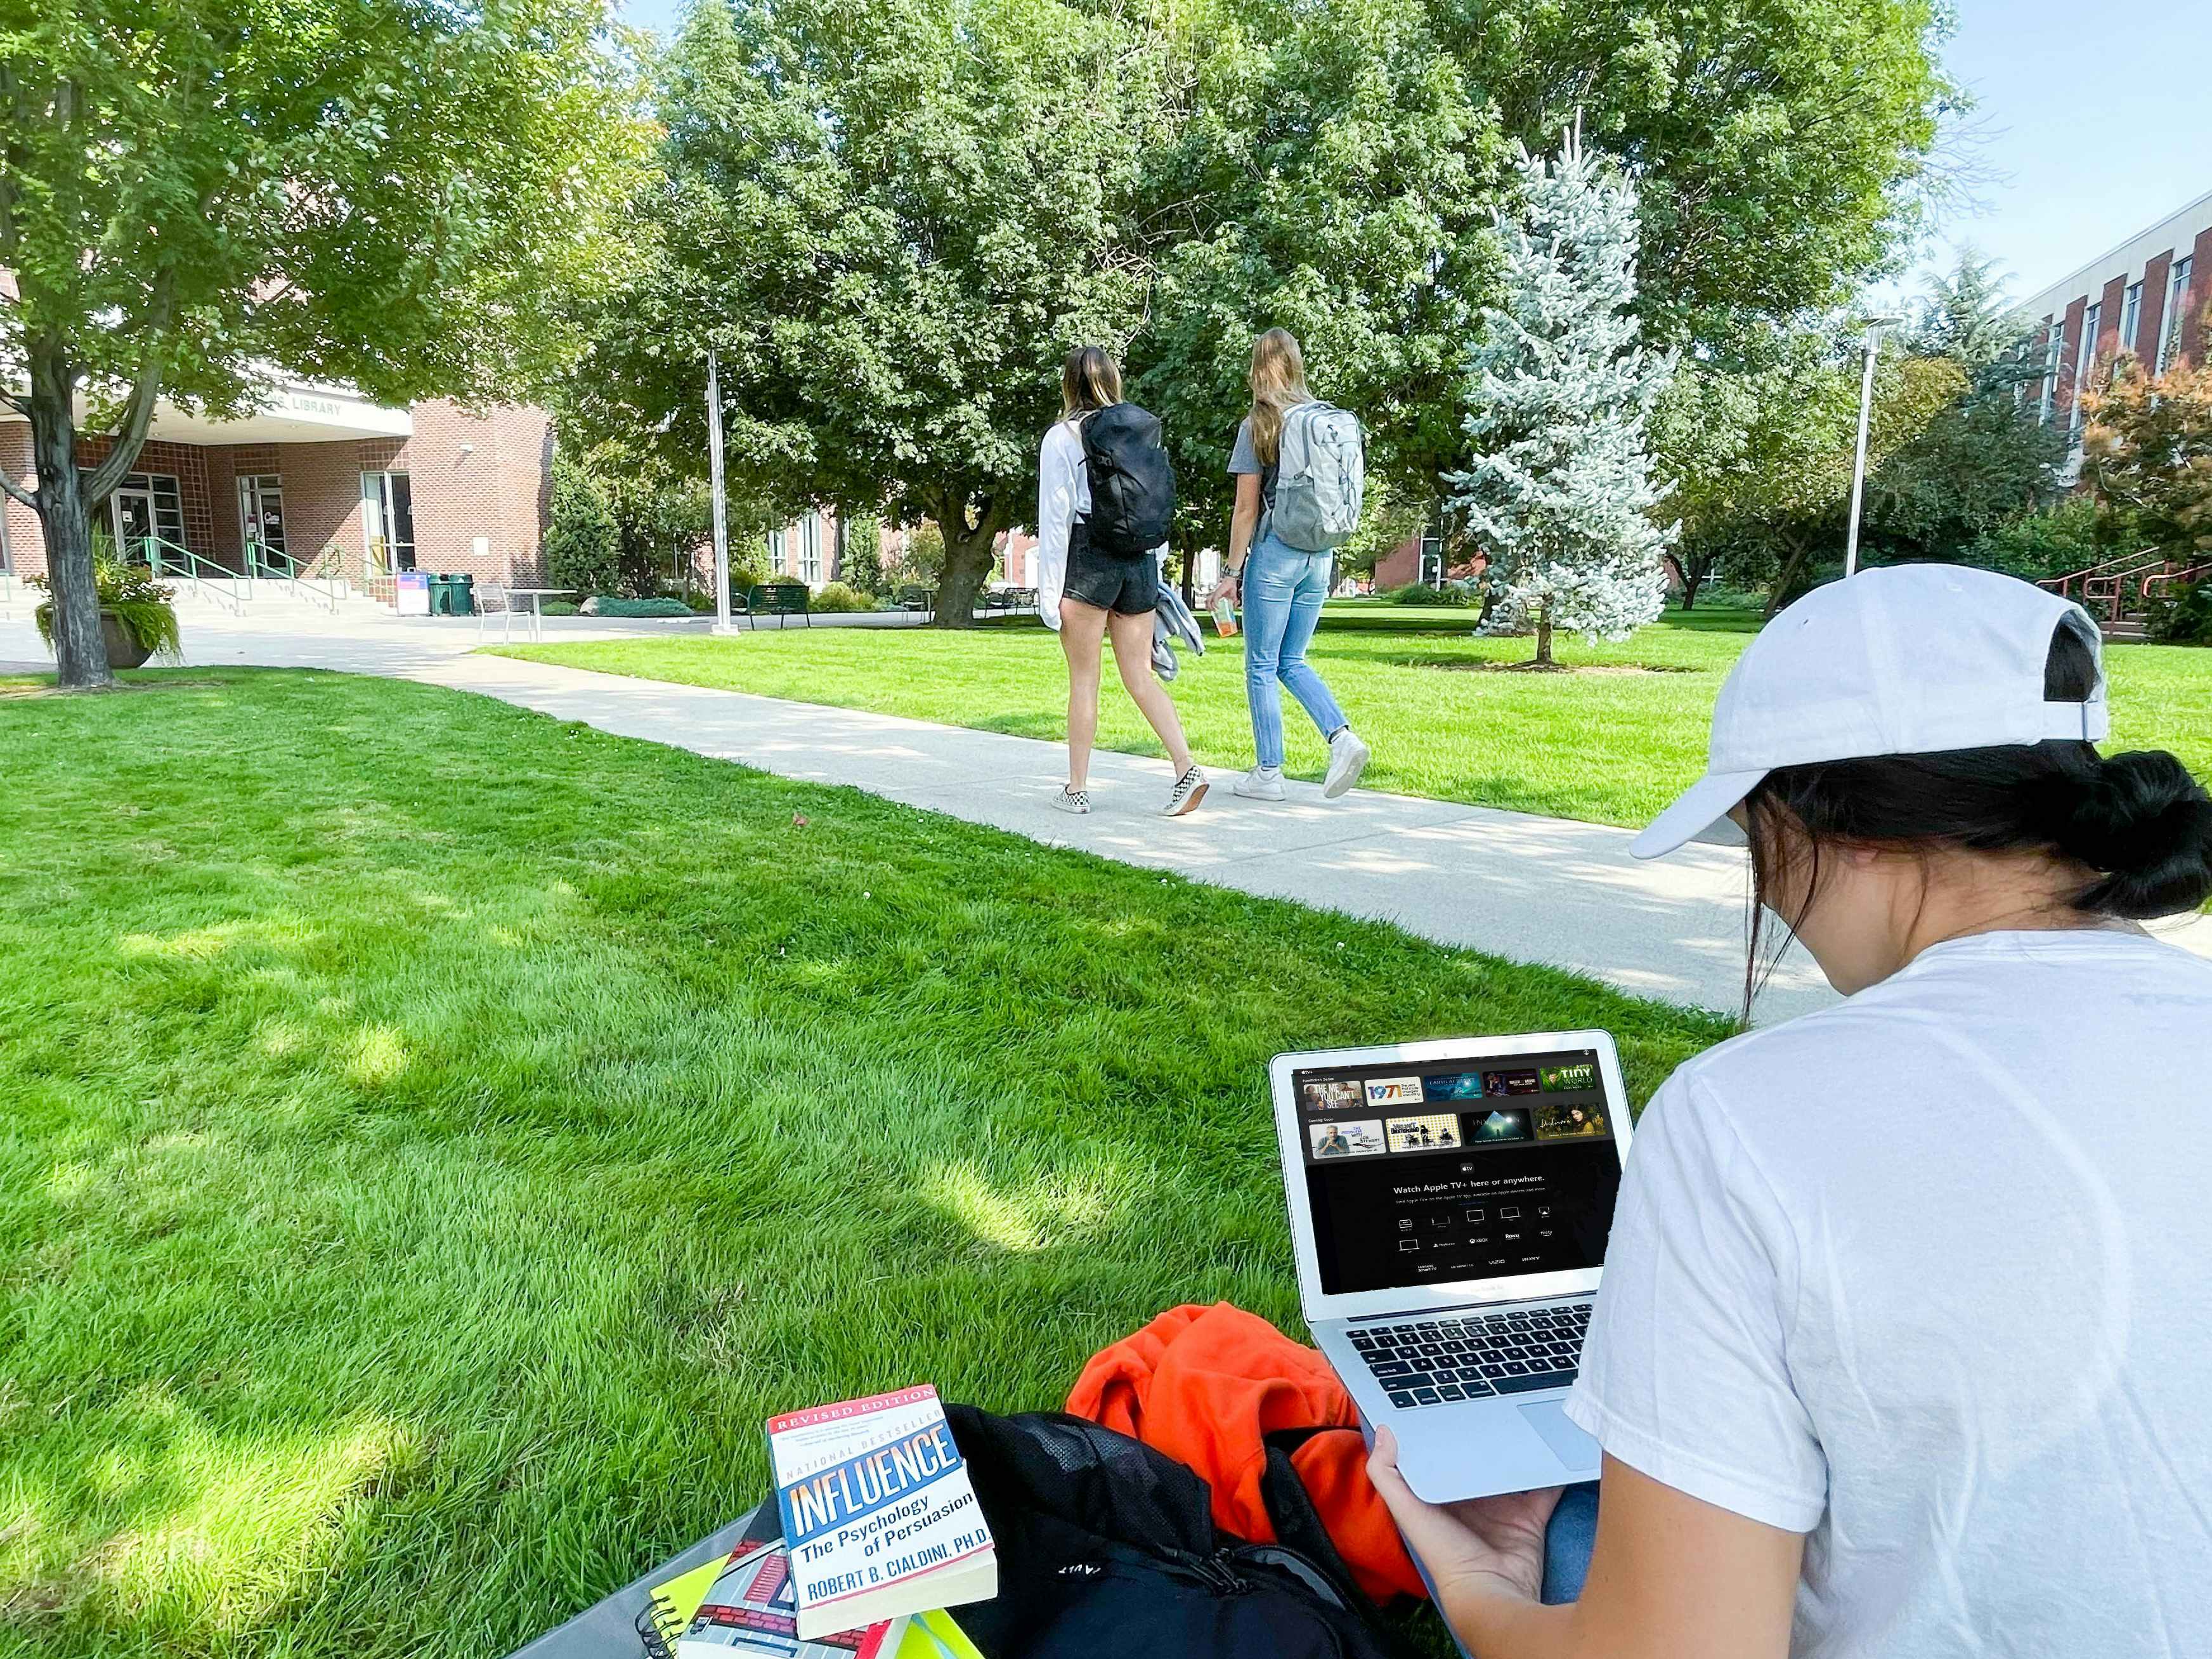 A college student sitting in grass on campus and watching Apple TV on laptop with two more students walking by on the sidewalk in the background.